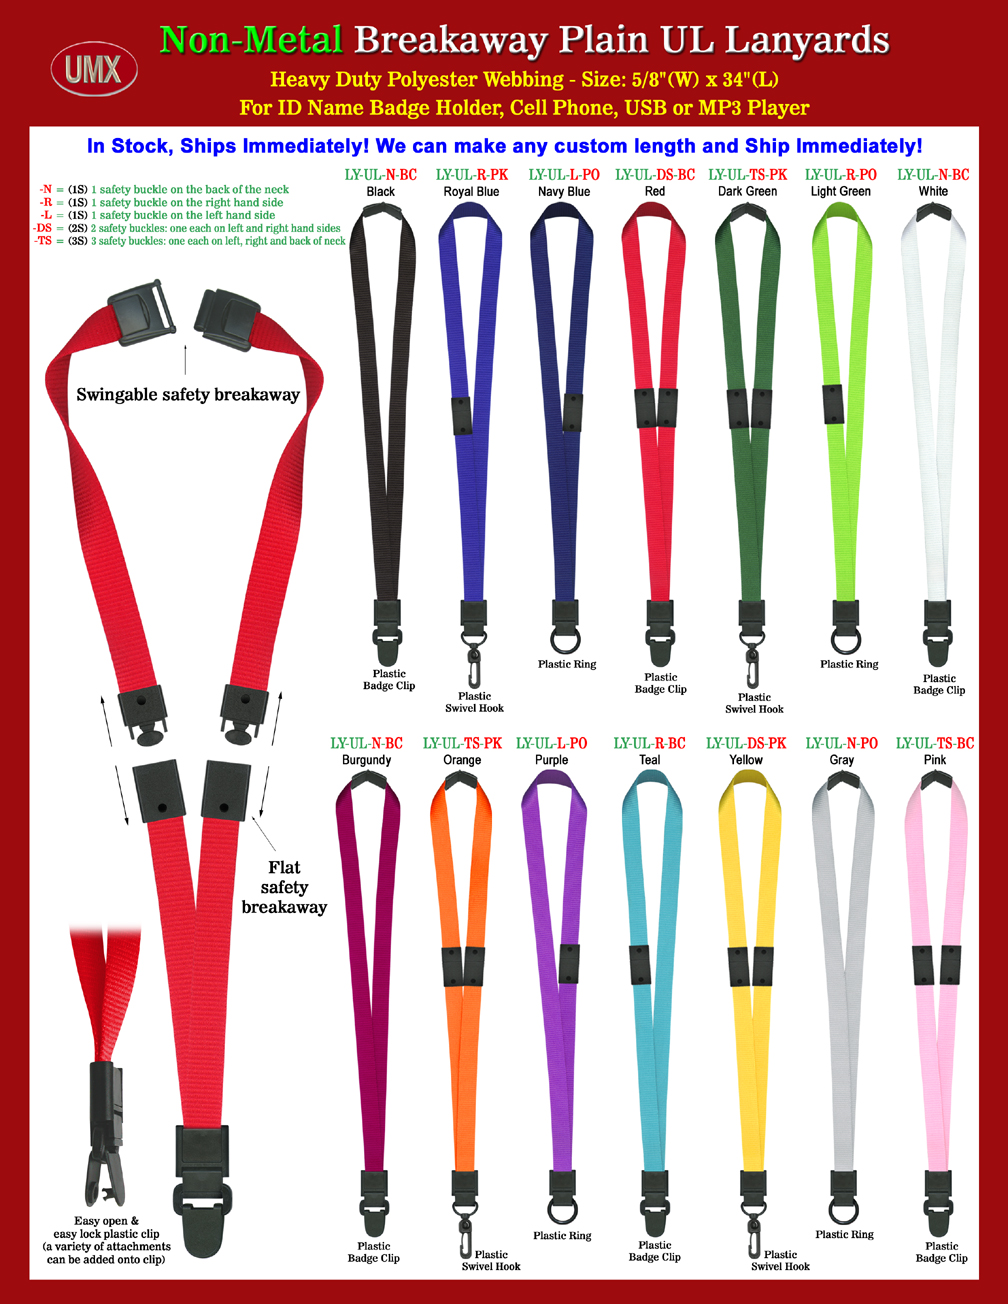 Non-Metal Plain Color Safety Breakaway Universal Link Lanyards - 5/8" Low Price Neck Lanyards With 13-Colors In Stock..